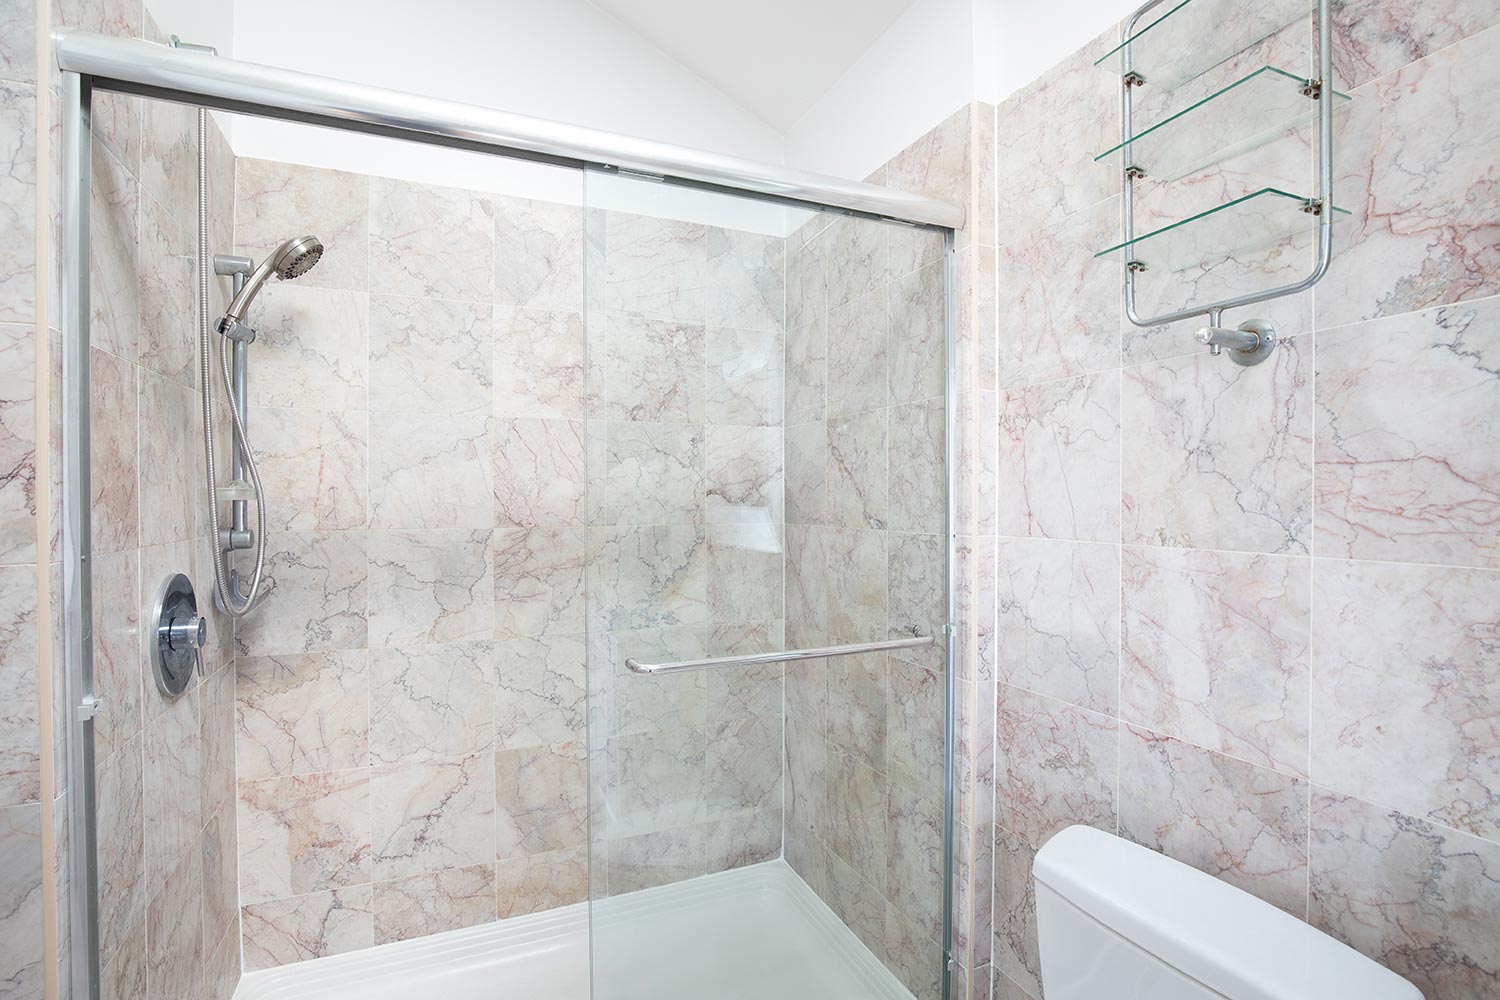 A marble tiled shower with a glass sliding door and chrome hardware